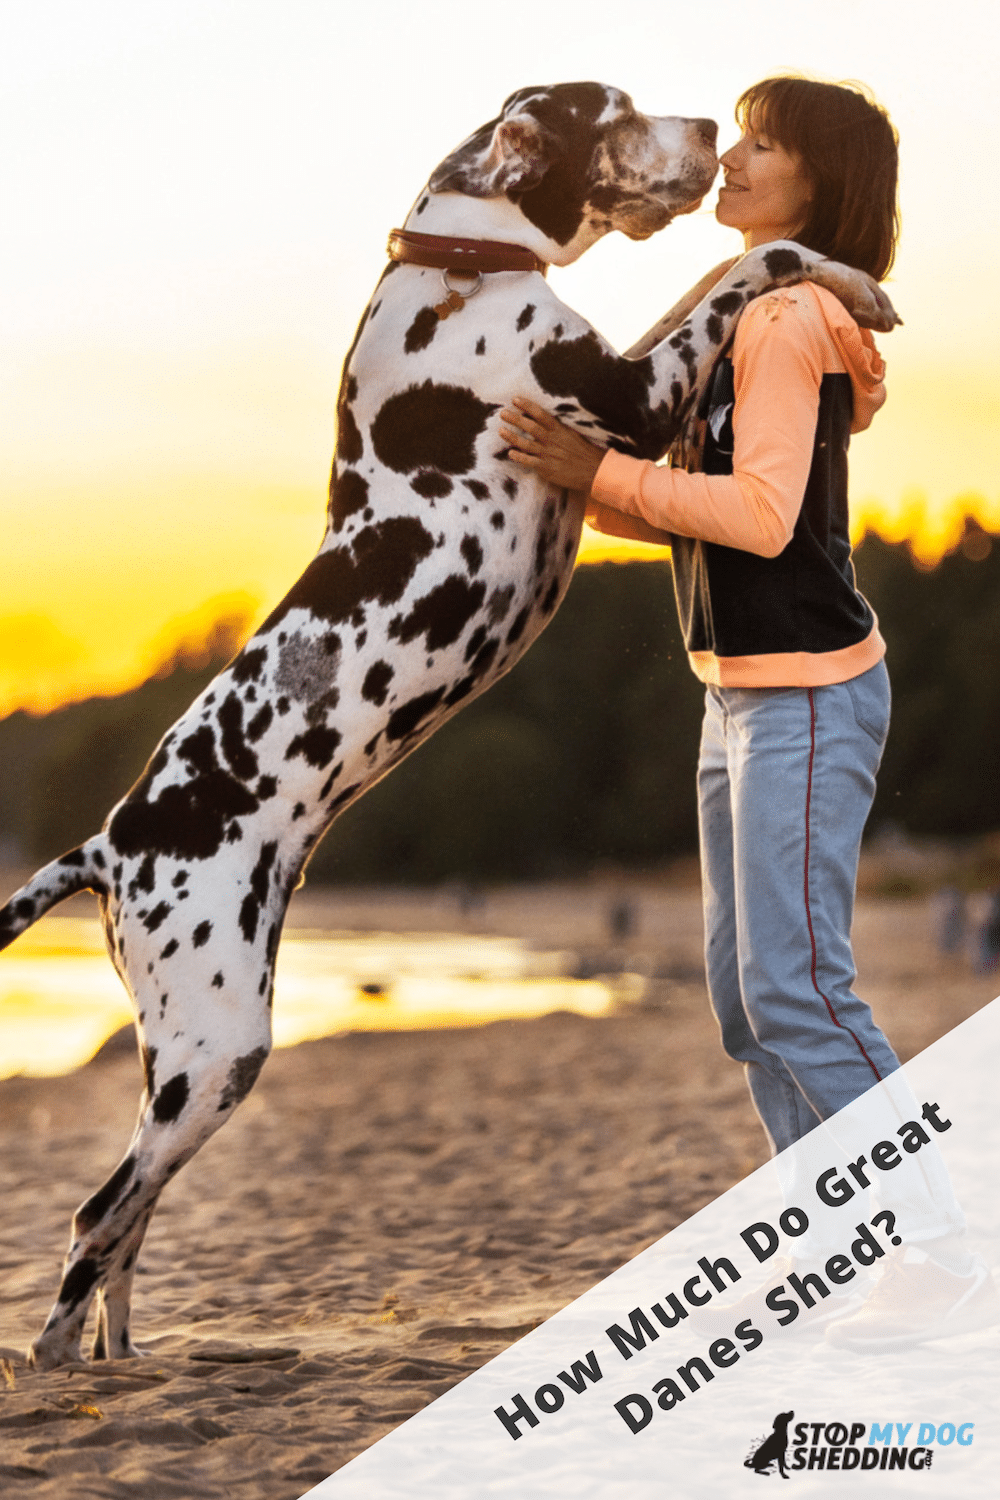 Do Great Danes Shed Much? (All You Need to Know)